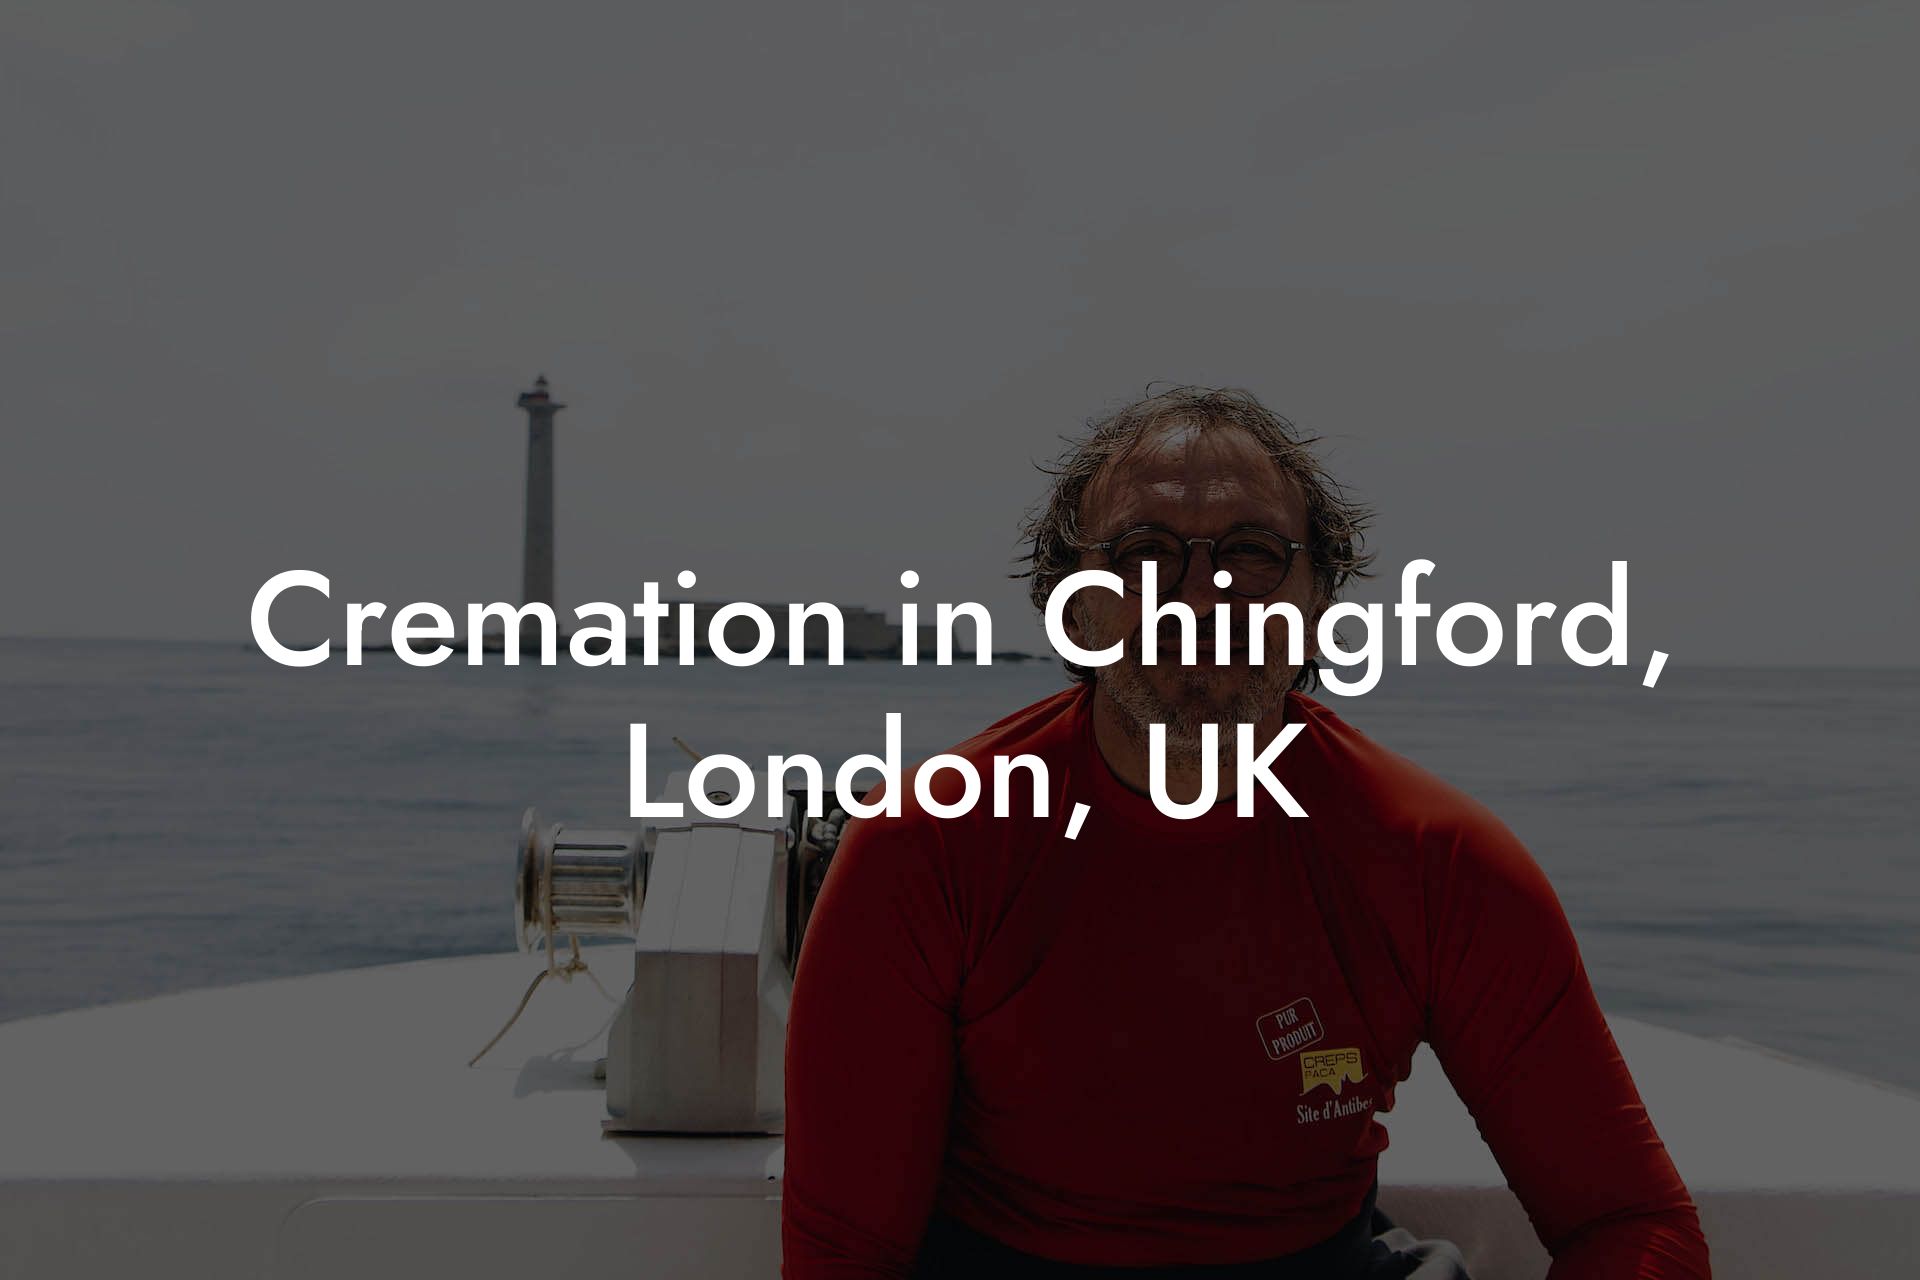 Cremation in Chingford, London, UK